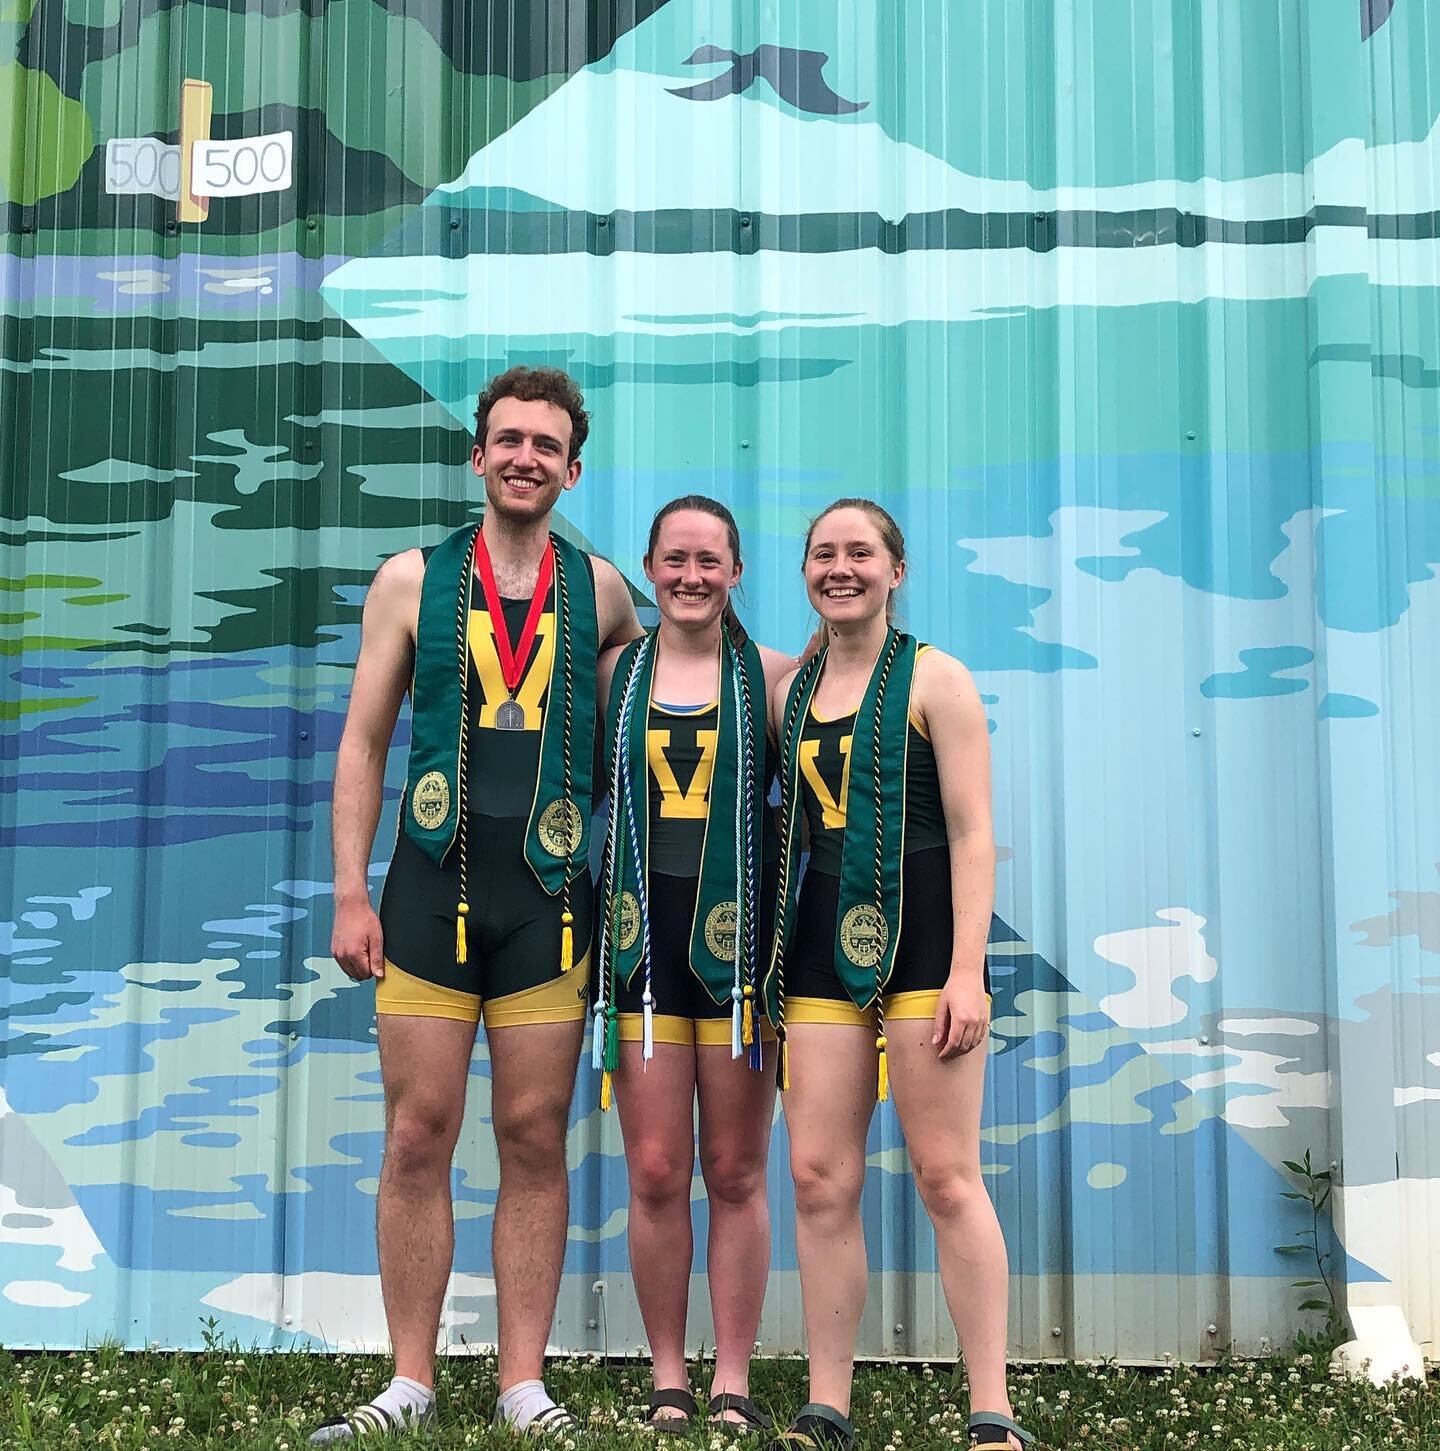 Congratulations to our ACRA Seniors on graduating as part of the Class of &lsquo;22 and some amazing racing this weekend. It&rsquo;s been a crazy 4 years and we are so excited to induct you into our alumni.
Great things ahead for you and the rest of 